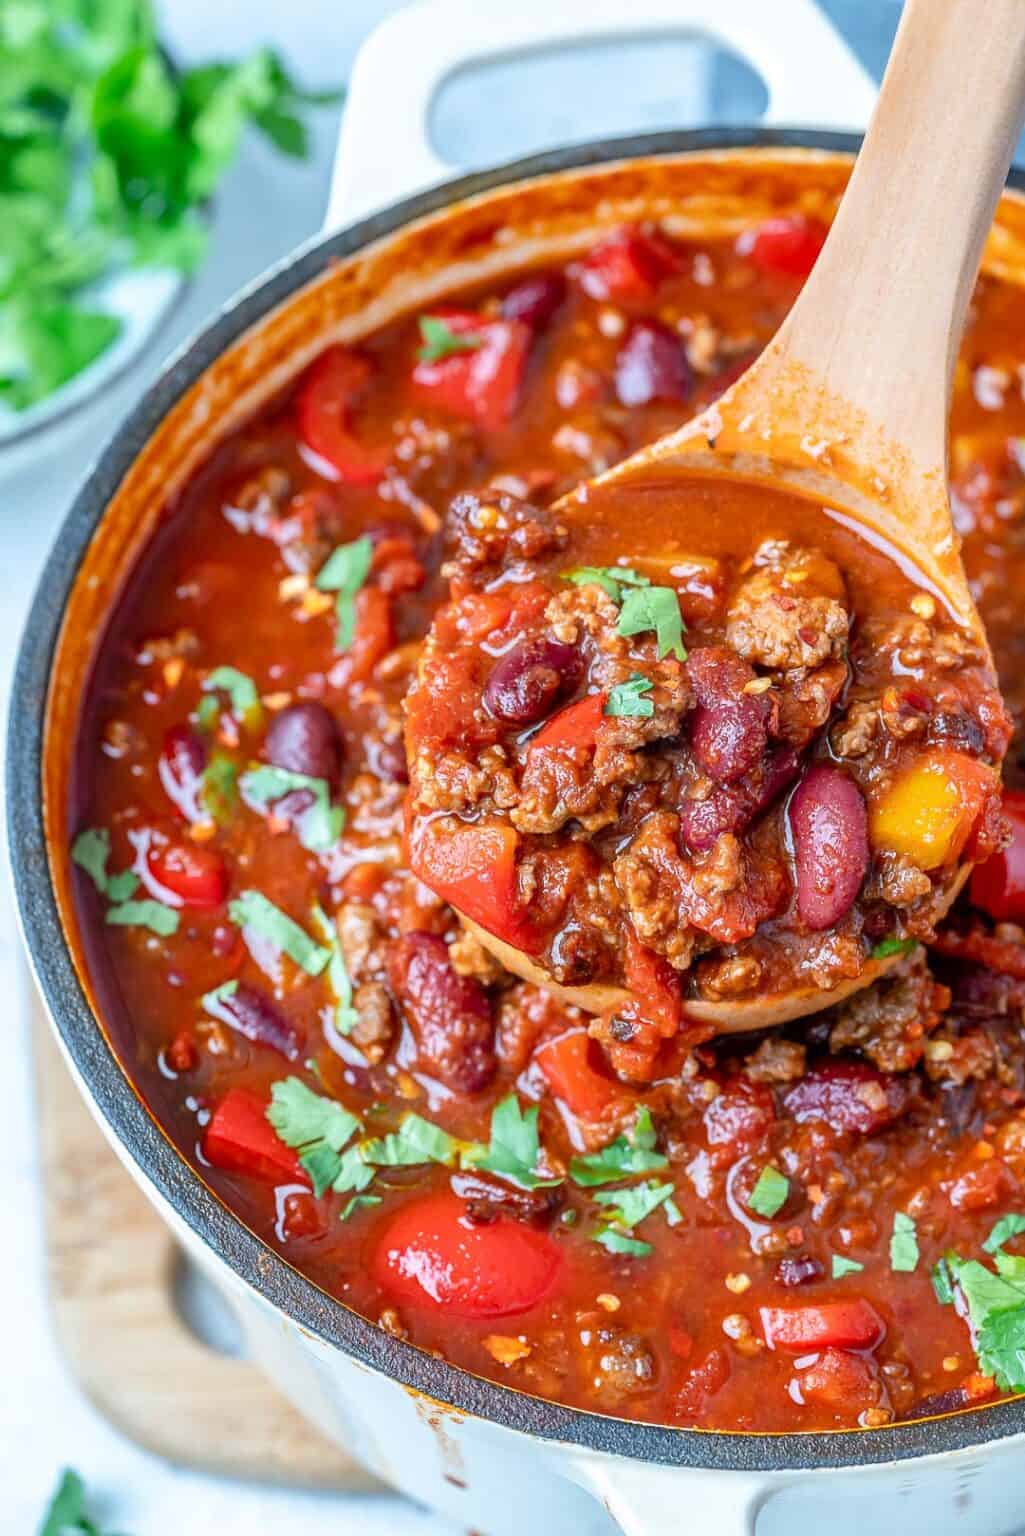 Easy Homemade Chili Lean Ground Beef and Chuck Roast - Whitaker Alicibuse